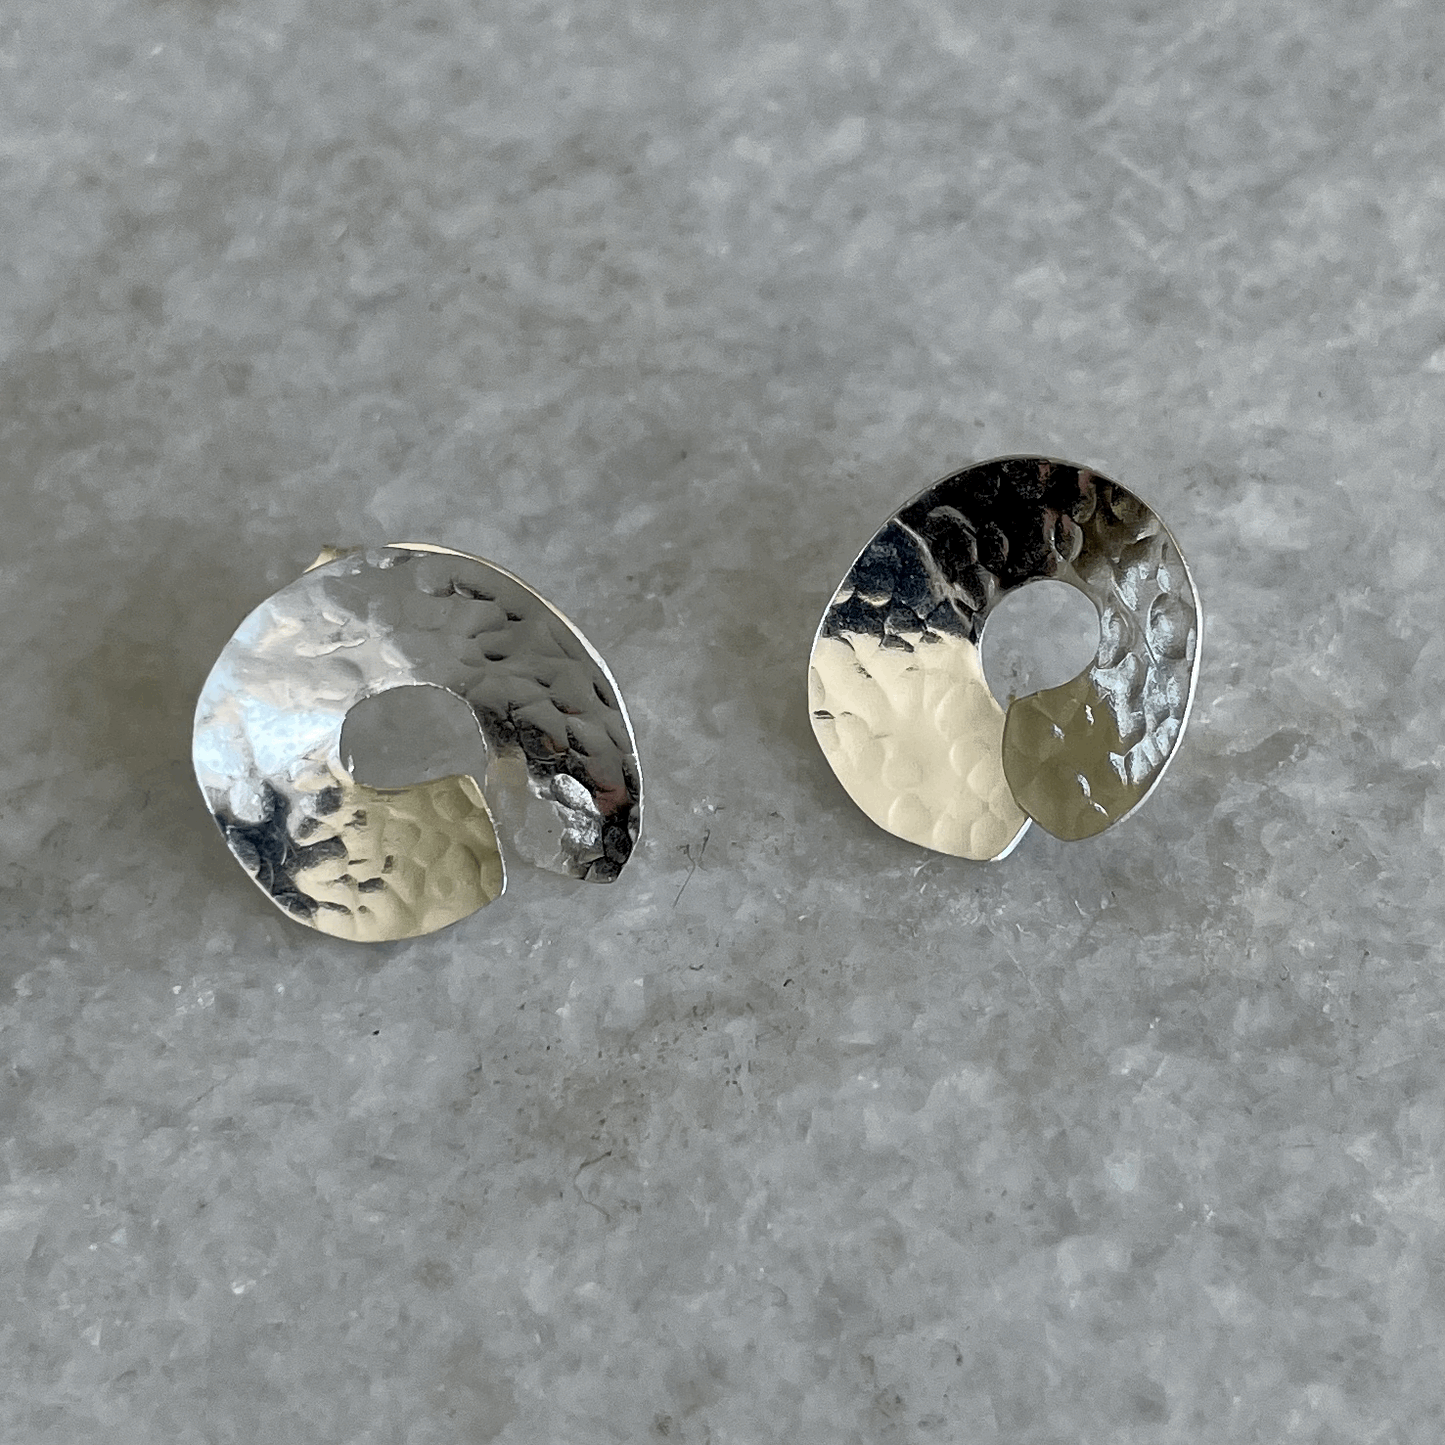 Codium Studs: handmade earrings in recycled silver, based on the shape of the ends of codium seaweed.